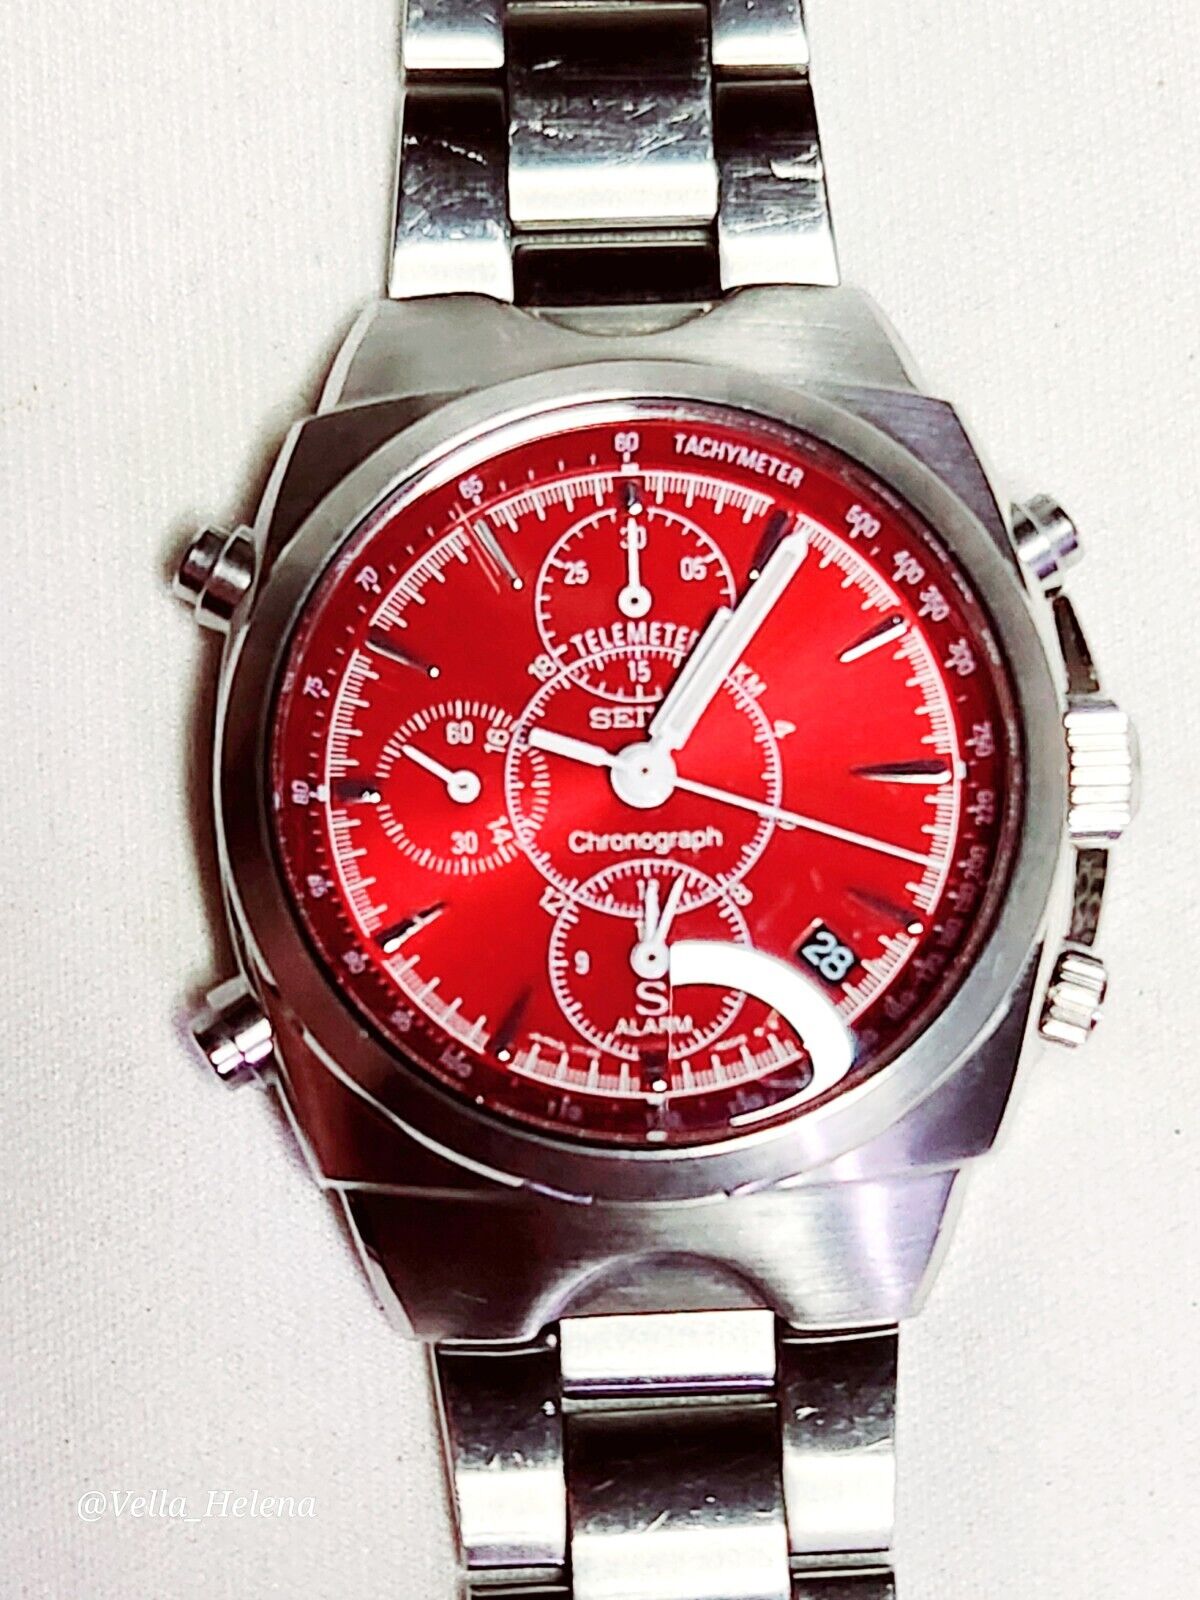 Vintage & Authentic Red Dialed SEIKO Chronograph Telemeter Watch